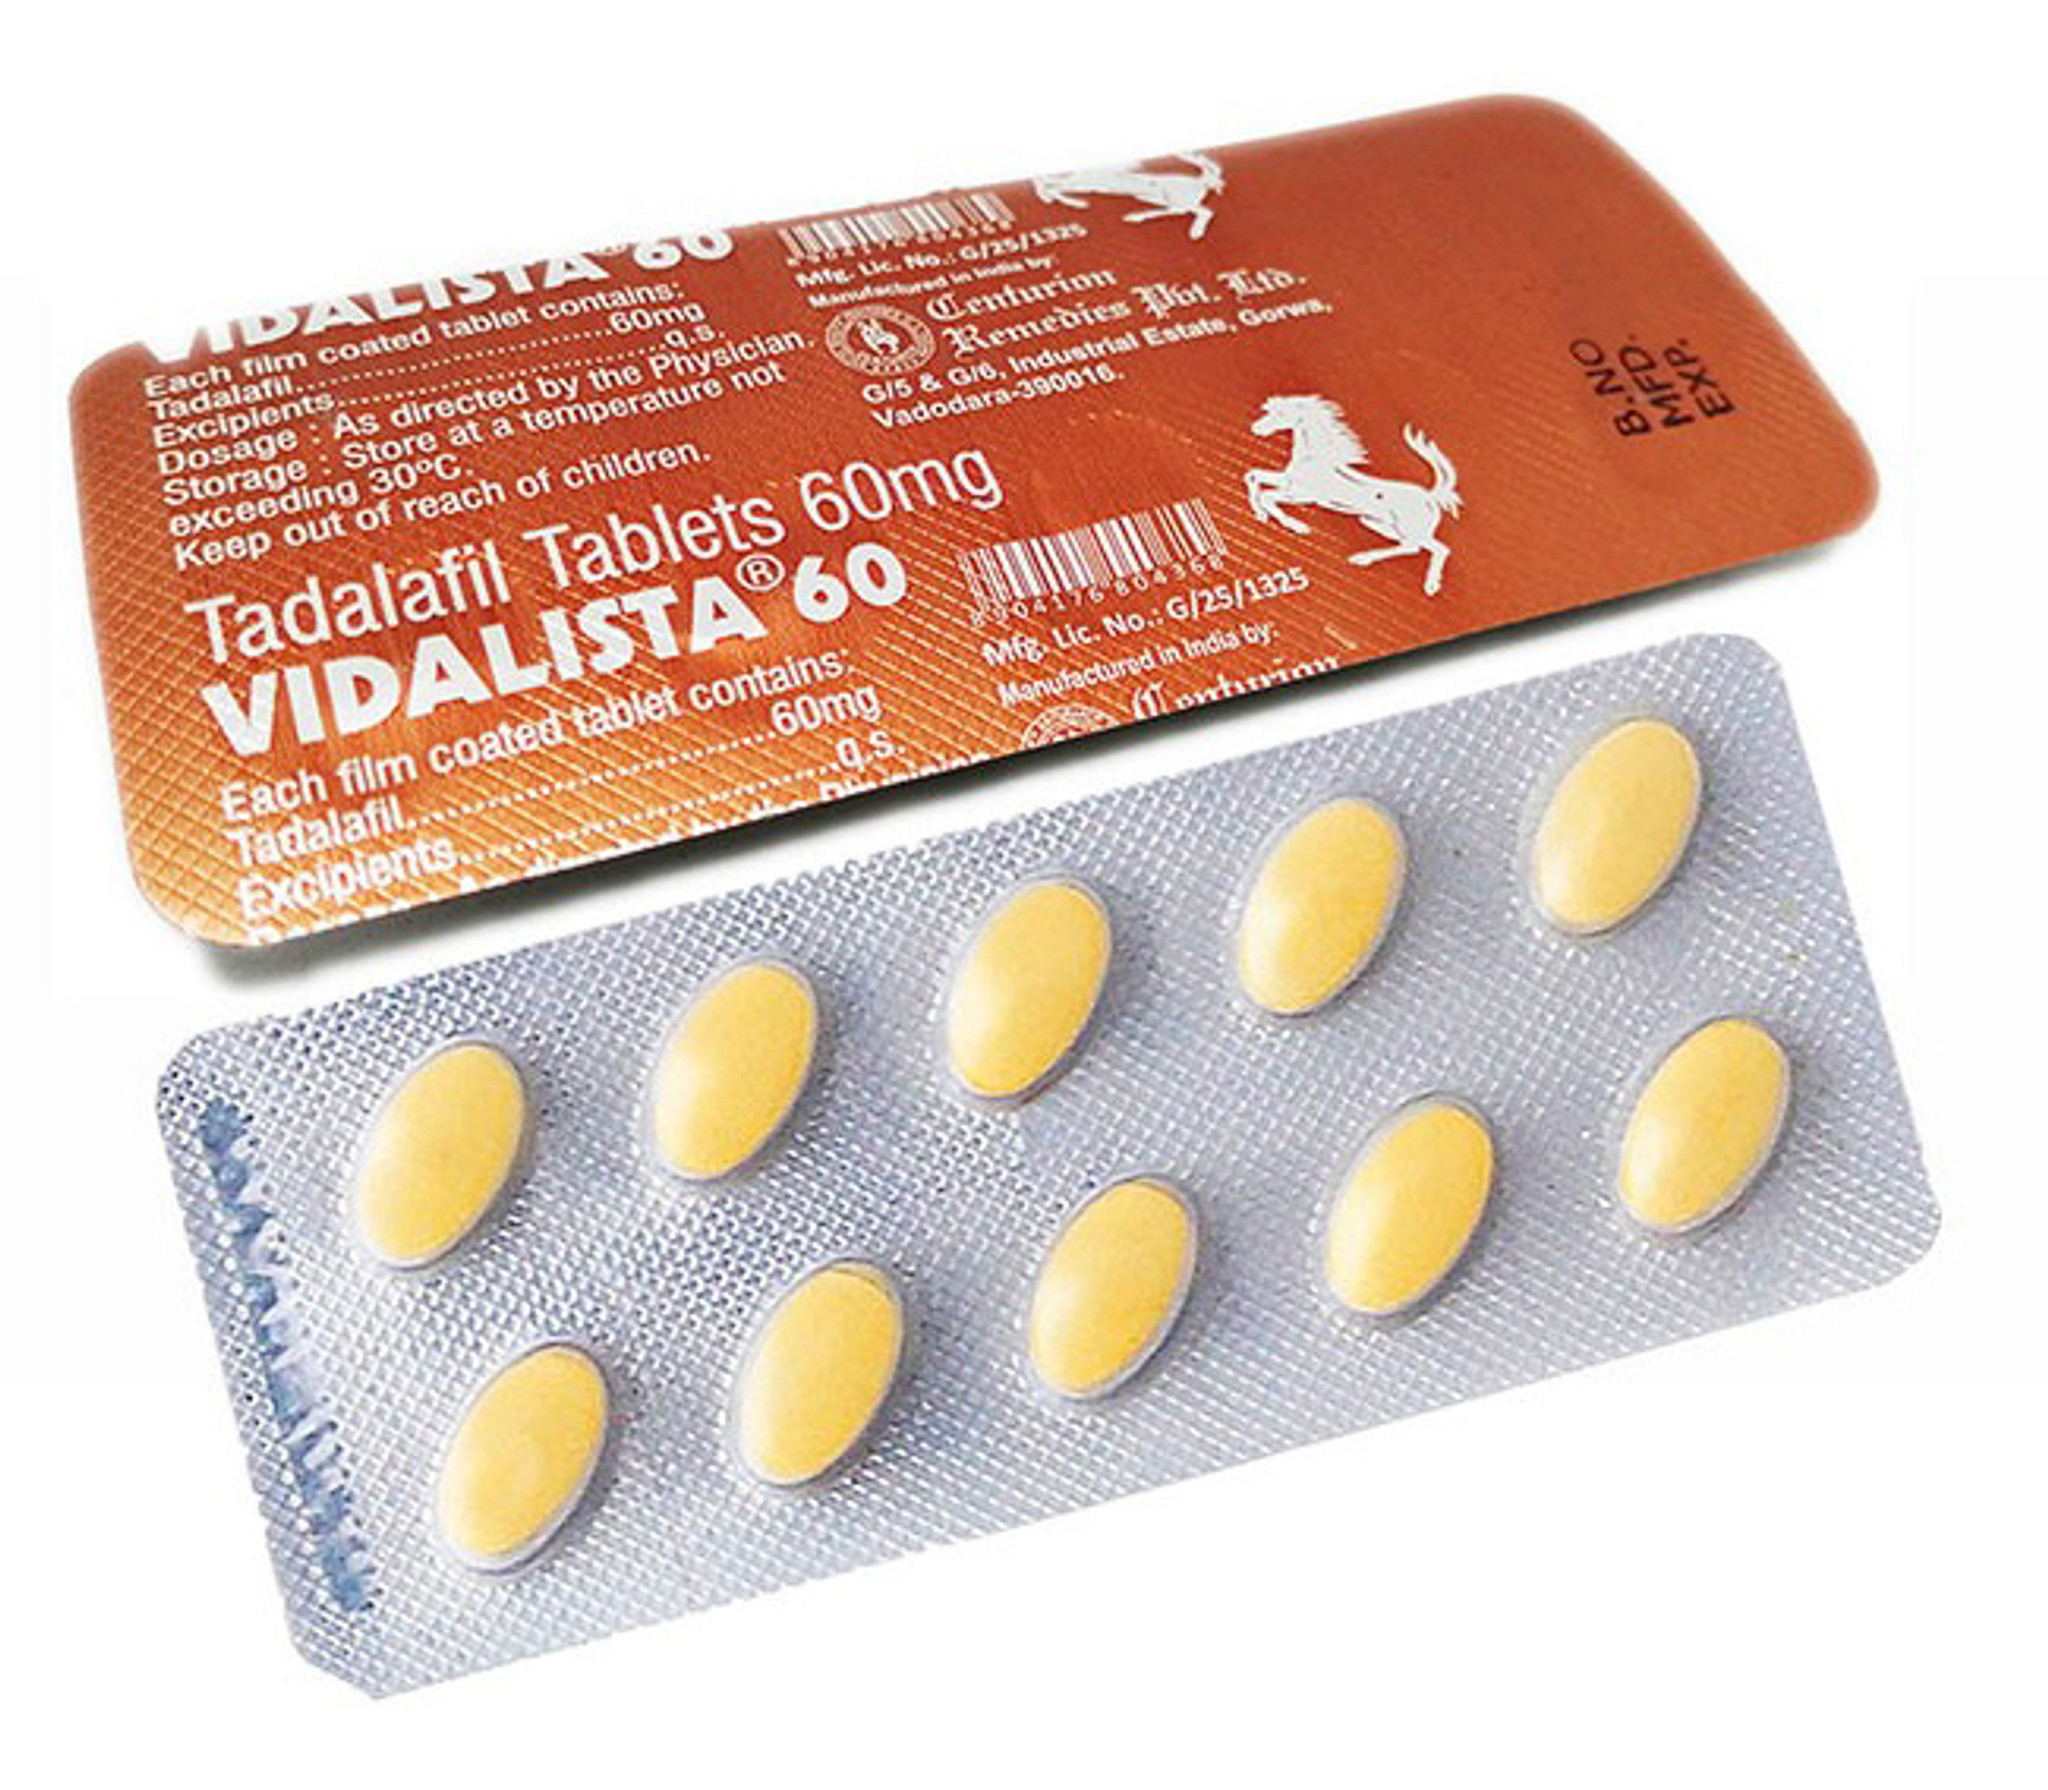 Vidalista 60 Mg - Review, Uses, Benefits, Side Effects